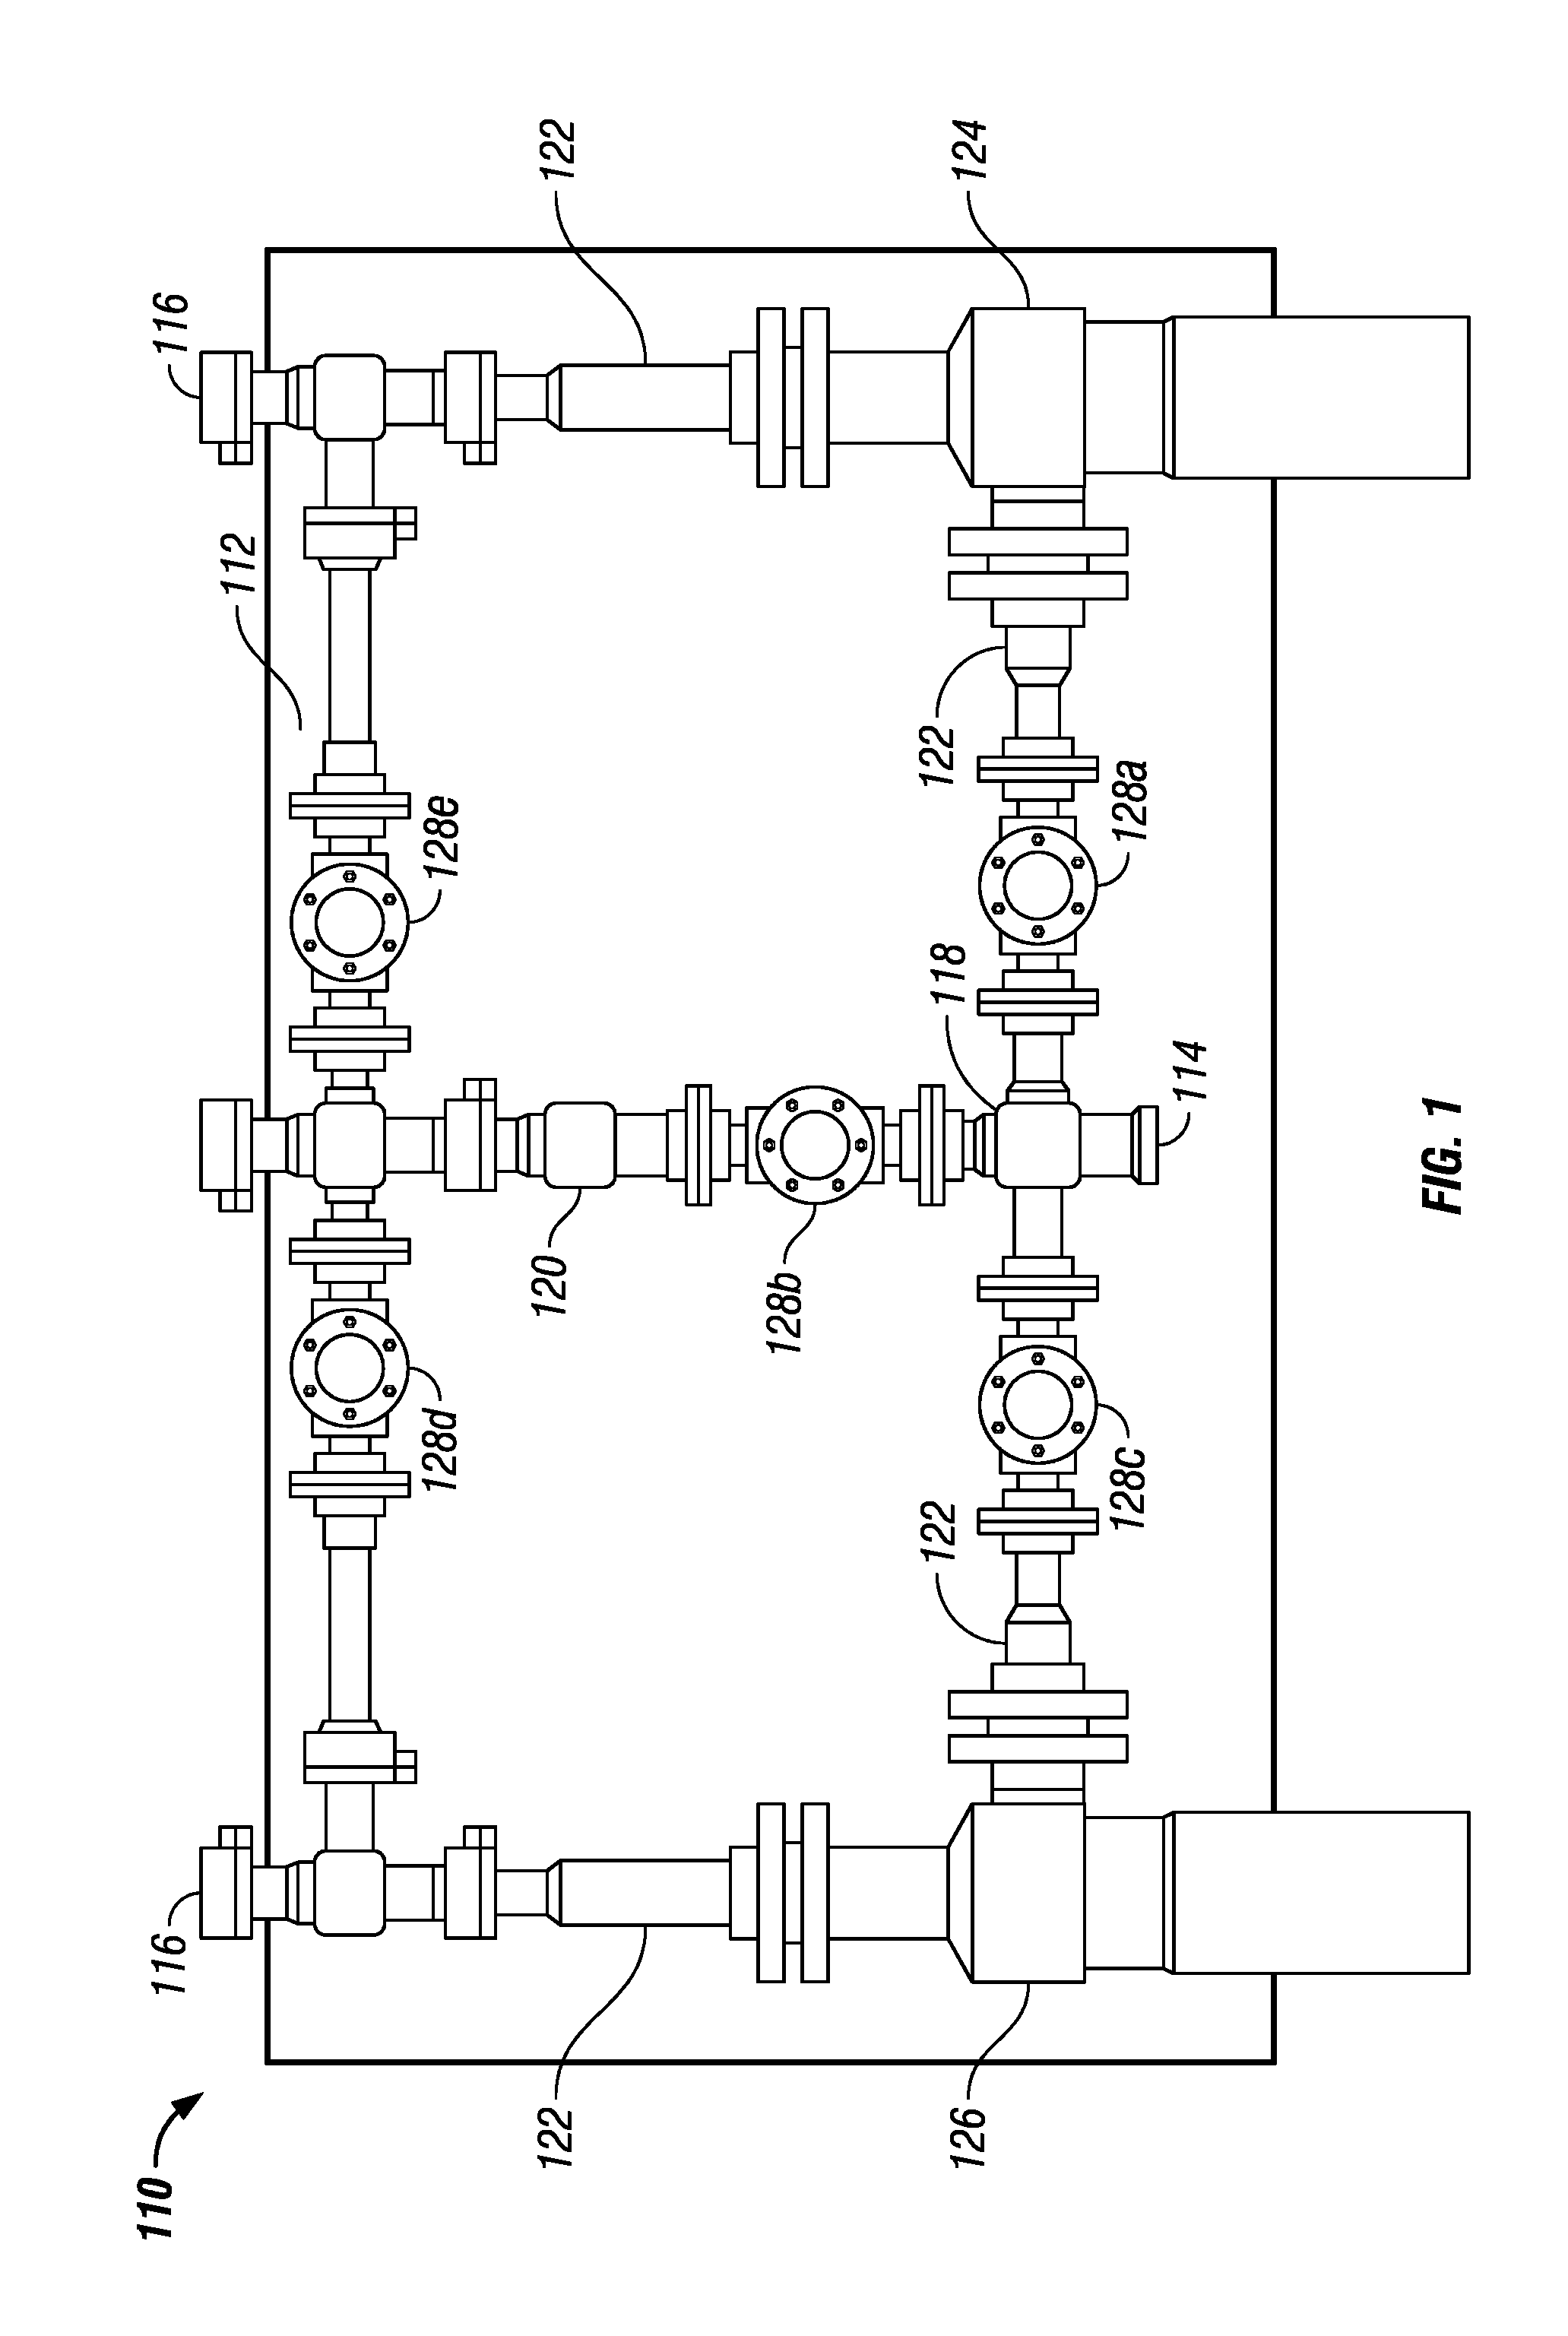 Modular pressure control and drilling waste management apparatus for subterranean borehole operations